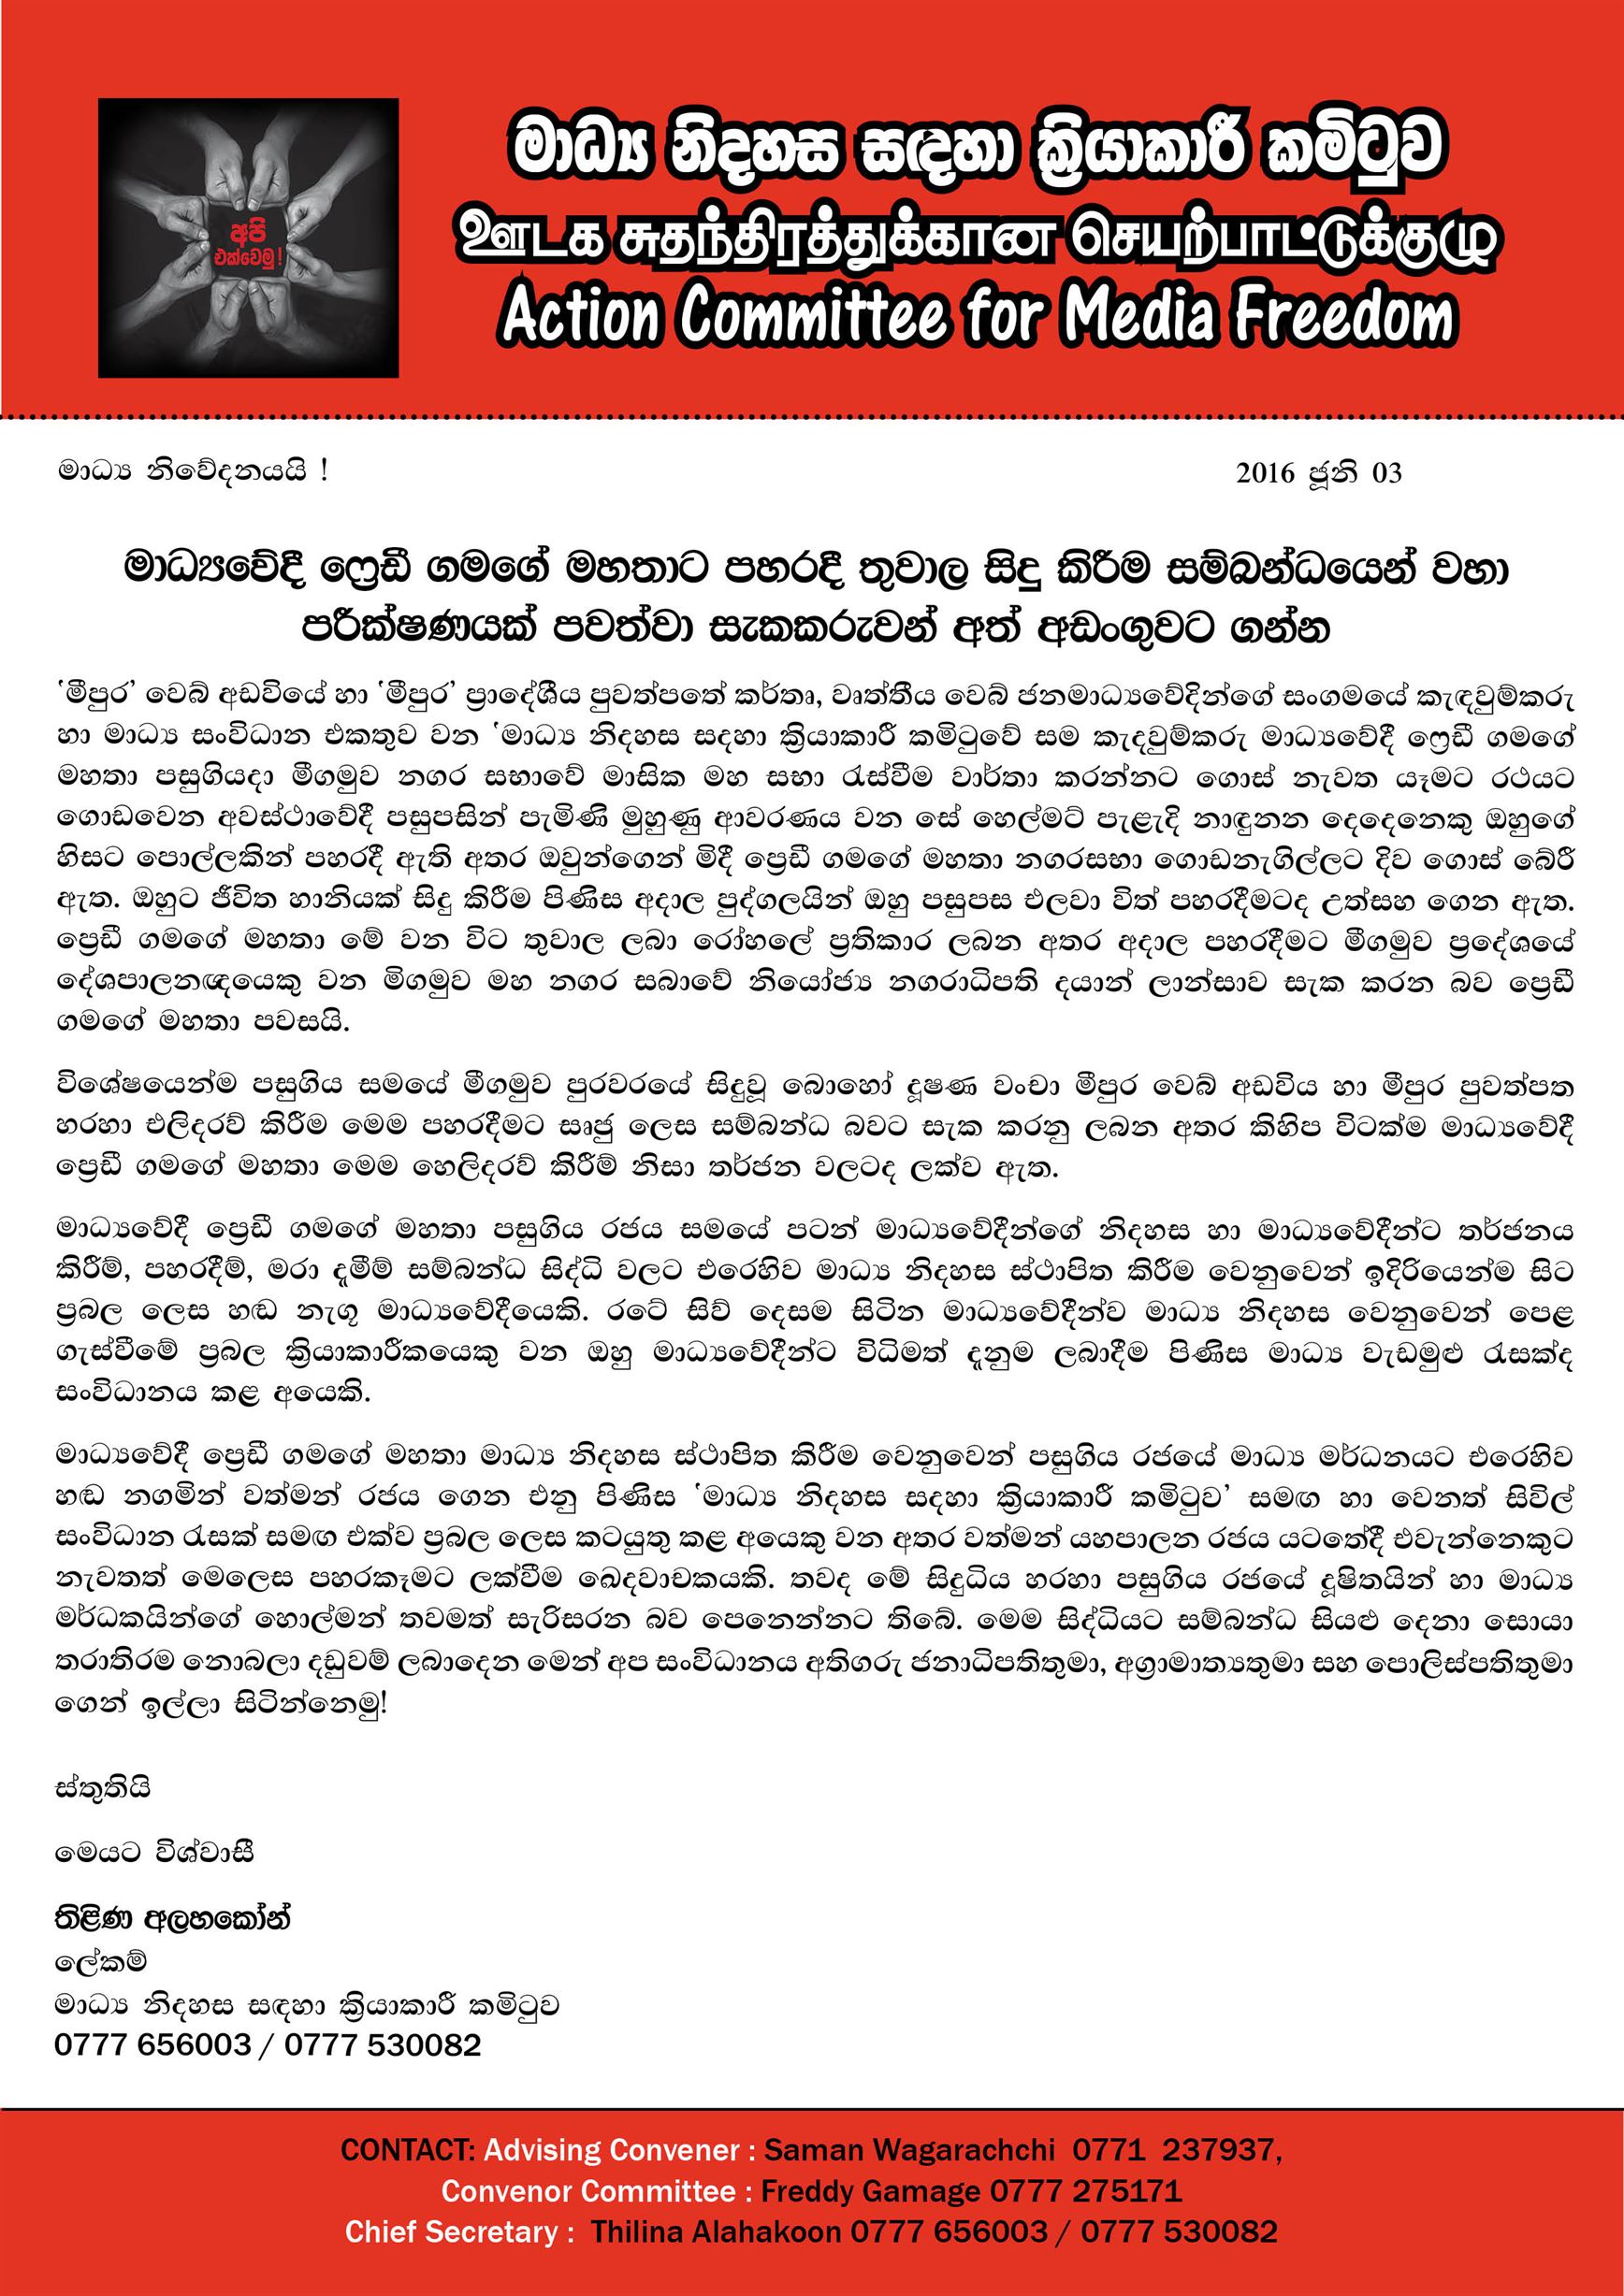 Freddy Gamage Attack Press- Media Action Committe-1